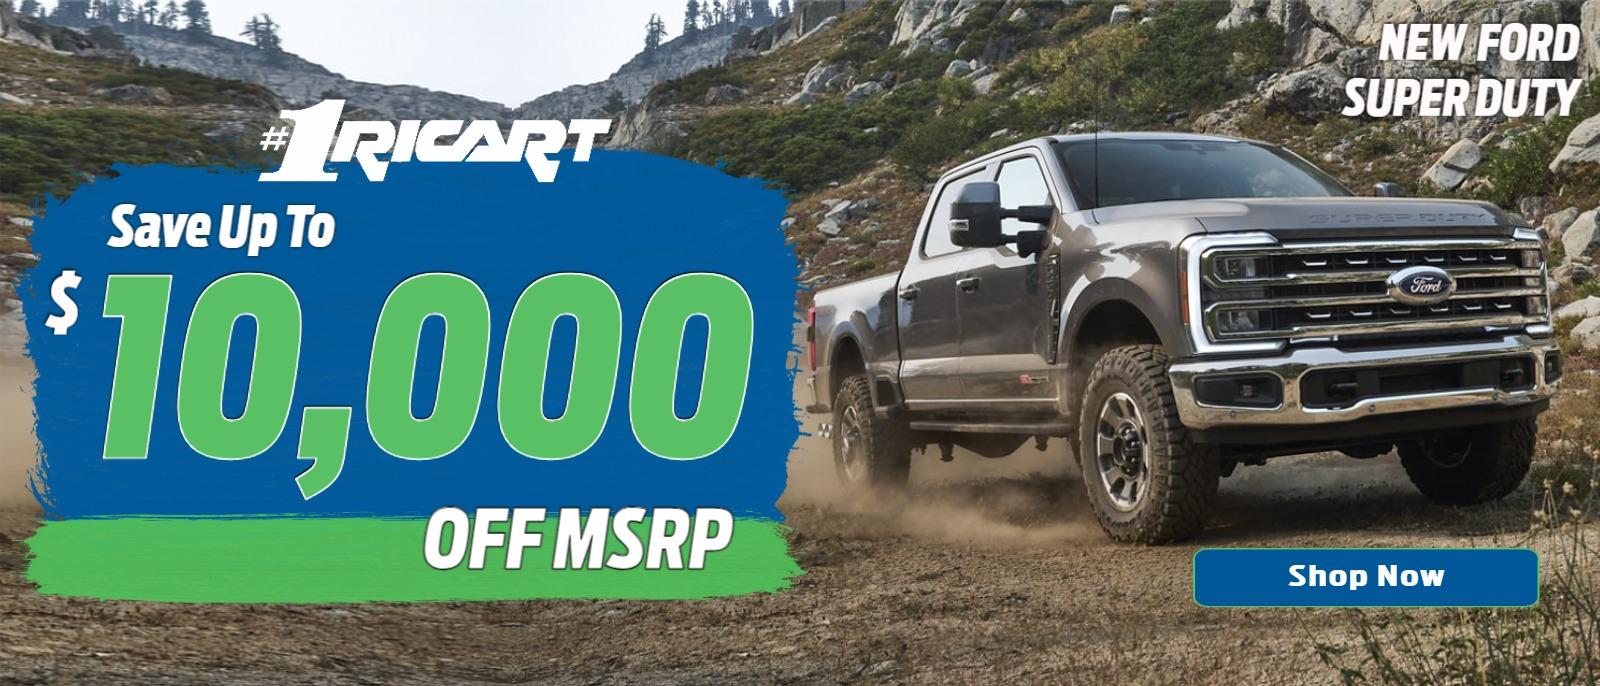 New FORD Super Duty Save up to $10,000 OFF MSRP